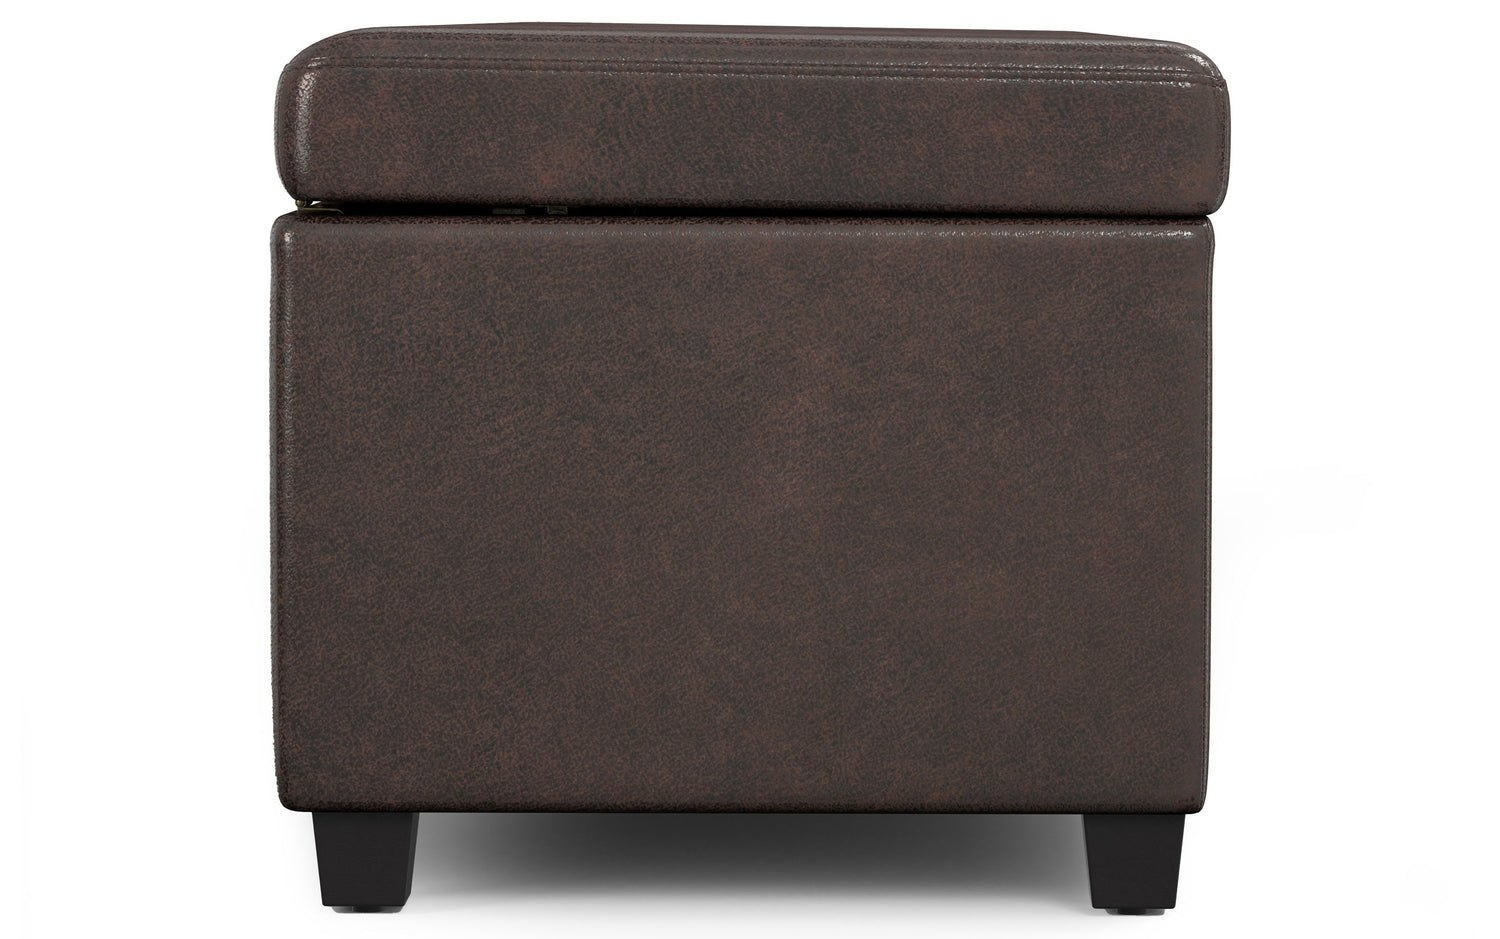 Distressed Brown Distressed Vegan Leather | Avalon Extra Large Storage Ottoman in Distressed Vegan Leather